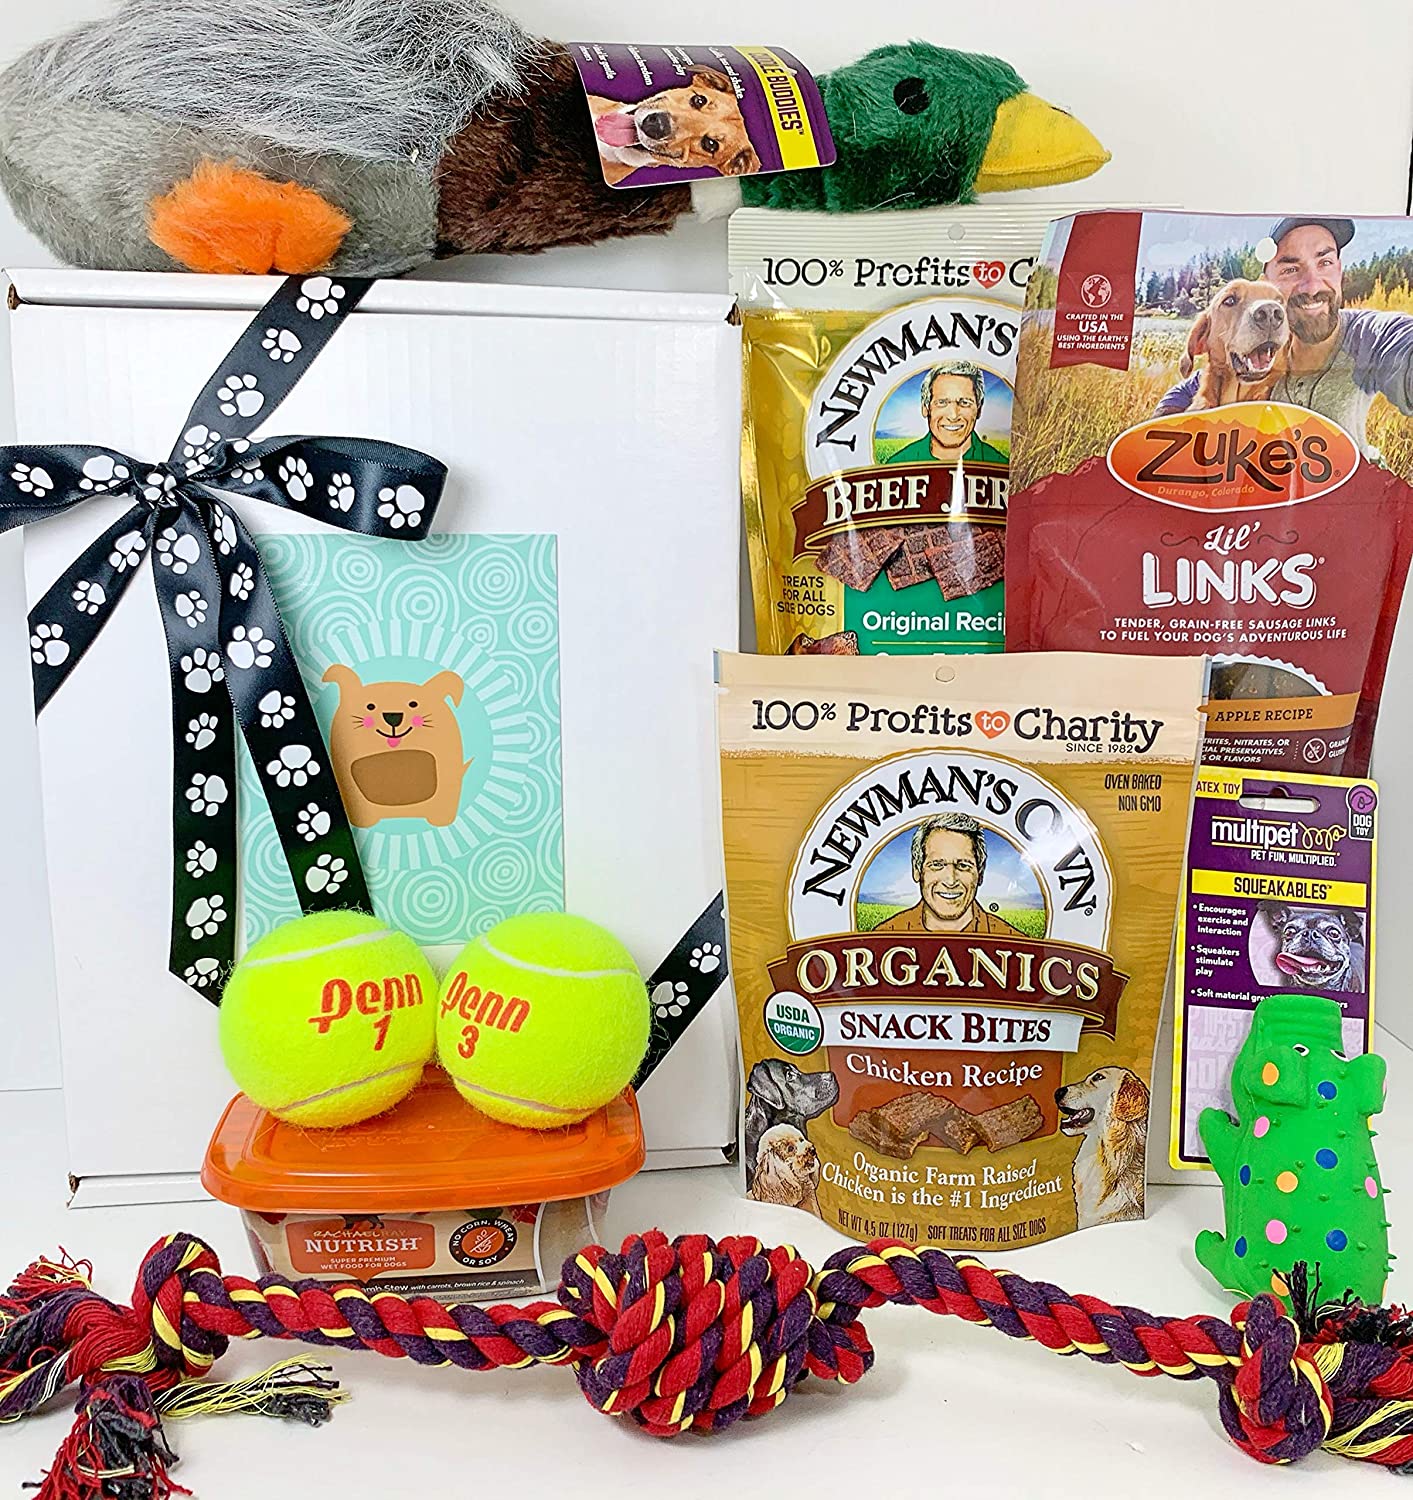 Deluxe Puppy Gift Box with Treats and Toys